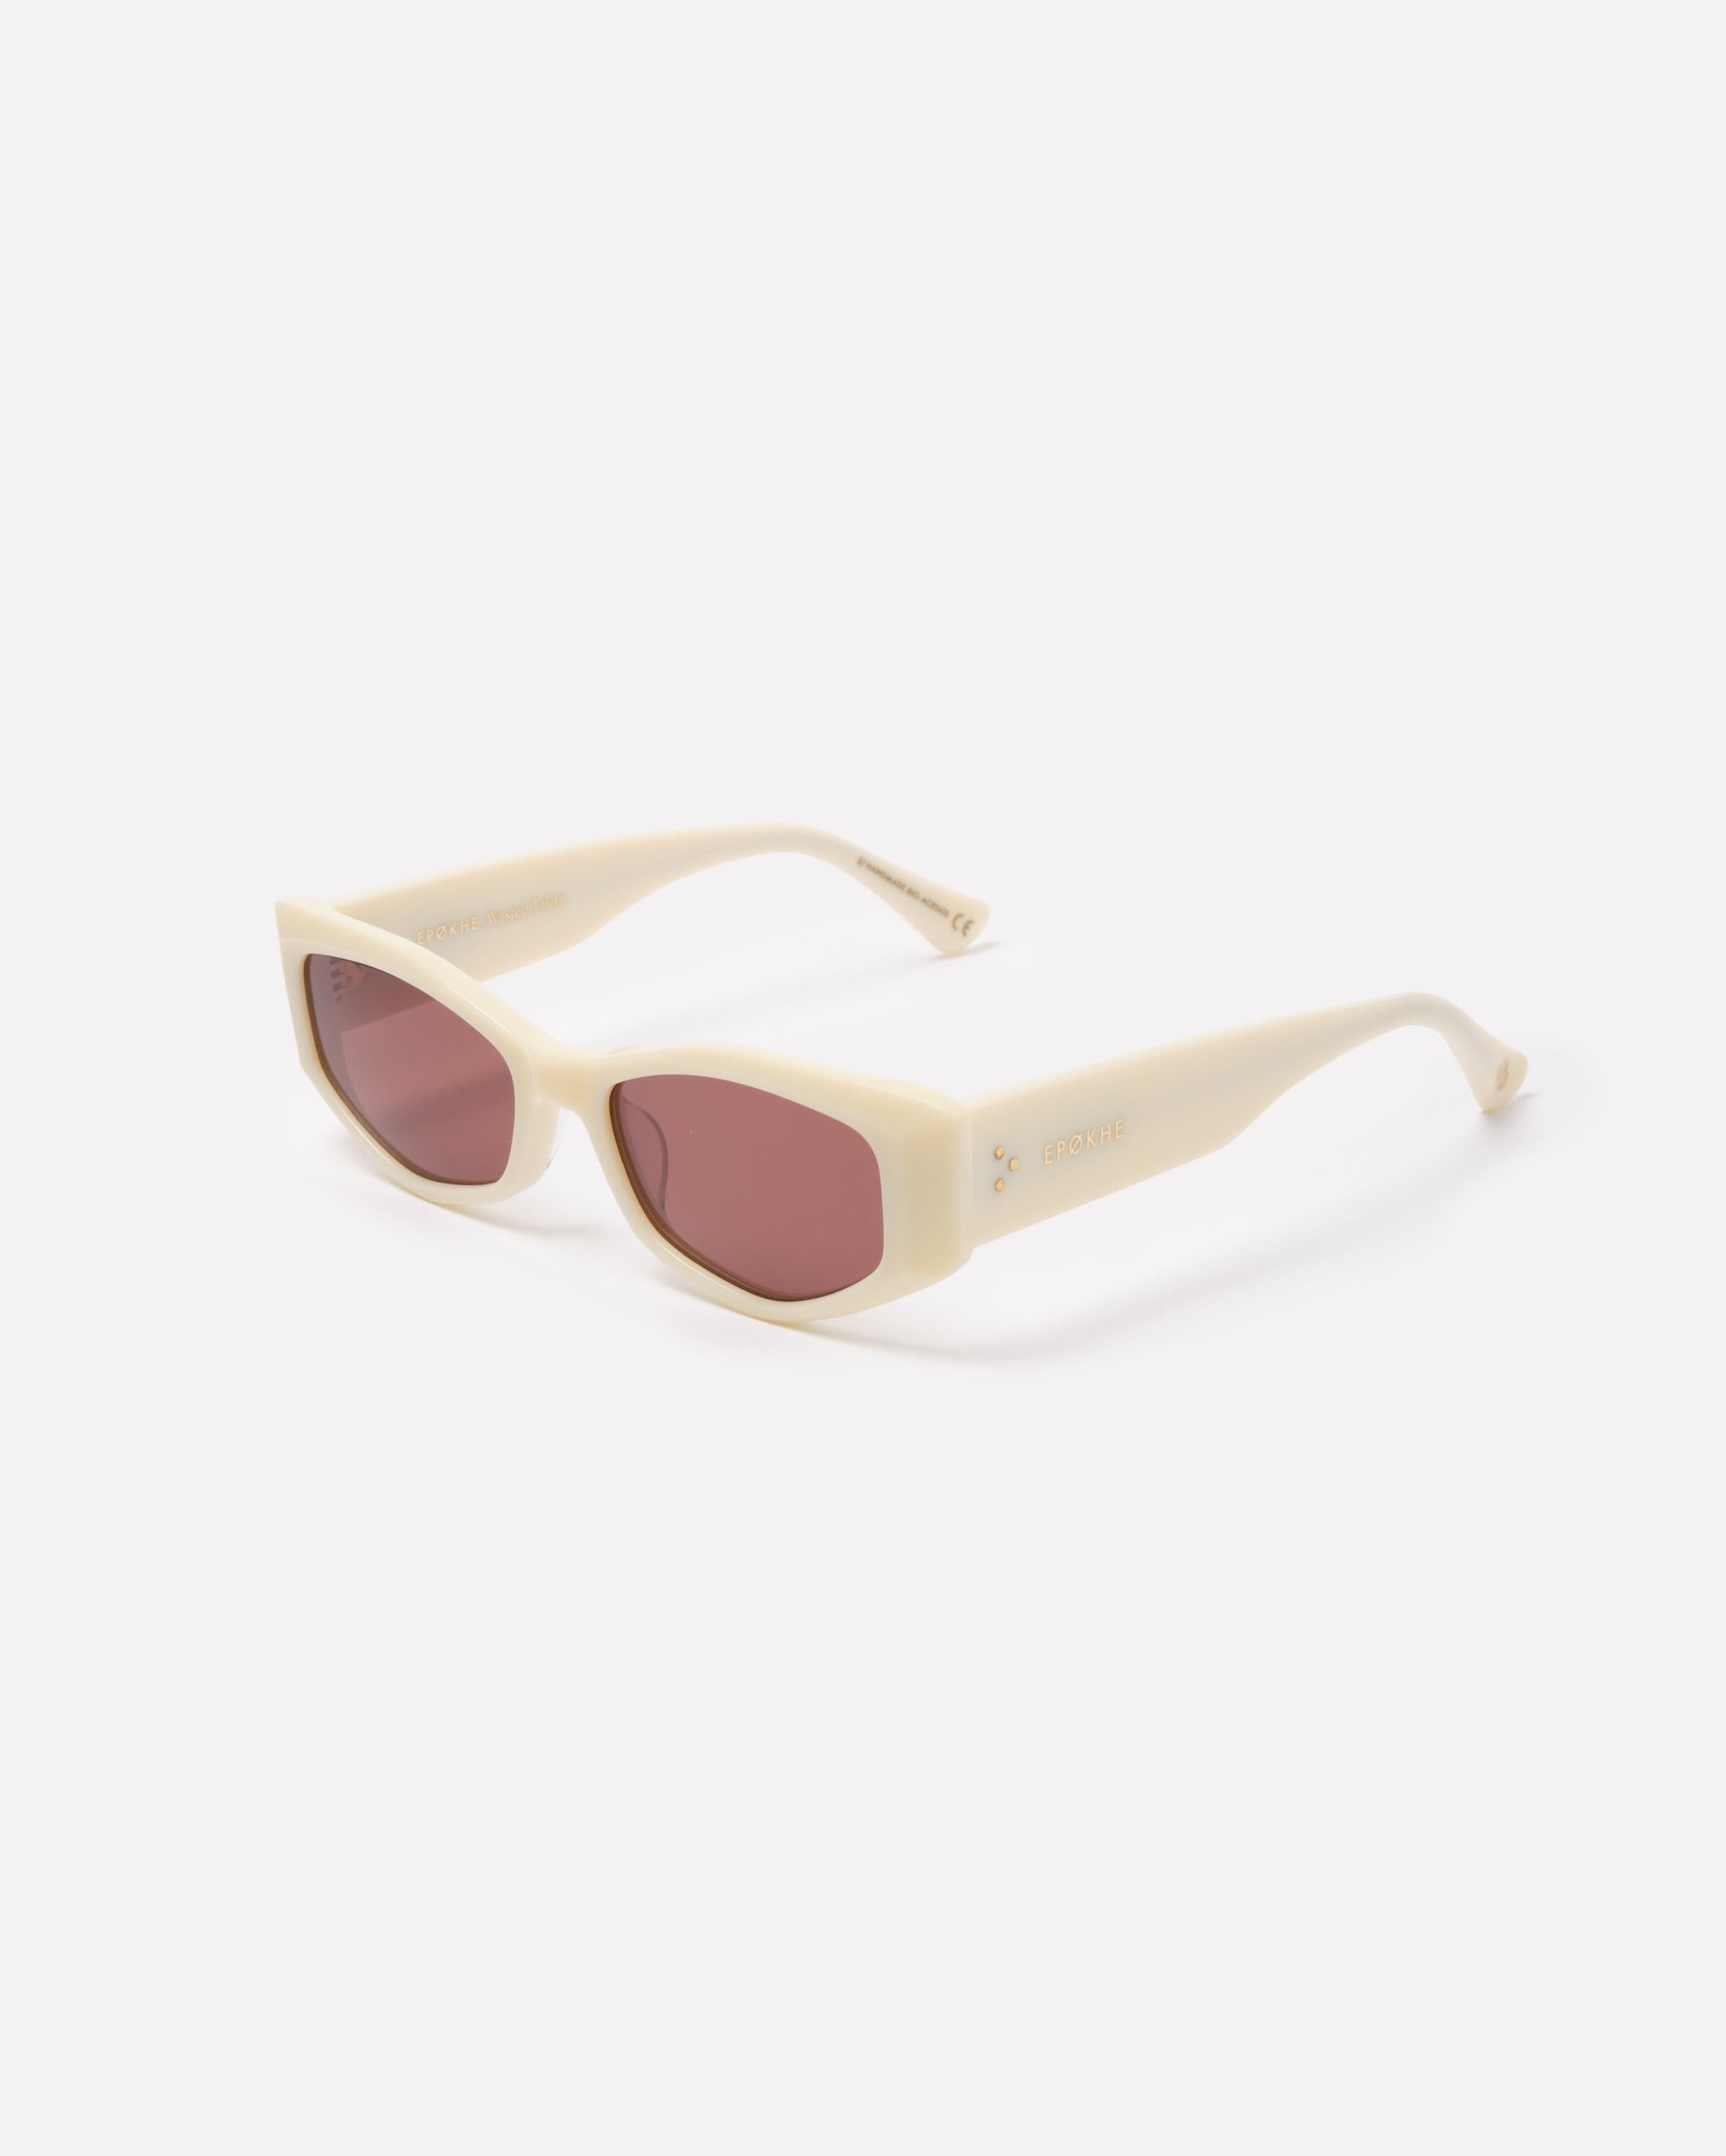 GUILTY X WASATED TALENT - Ivory Polished / Bronze - Board Store EpokheSunglasses  